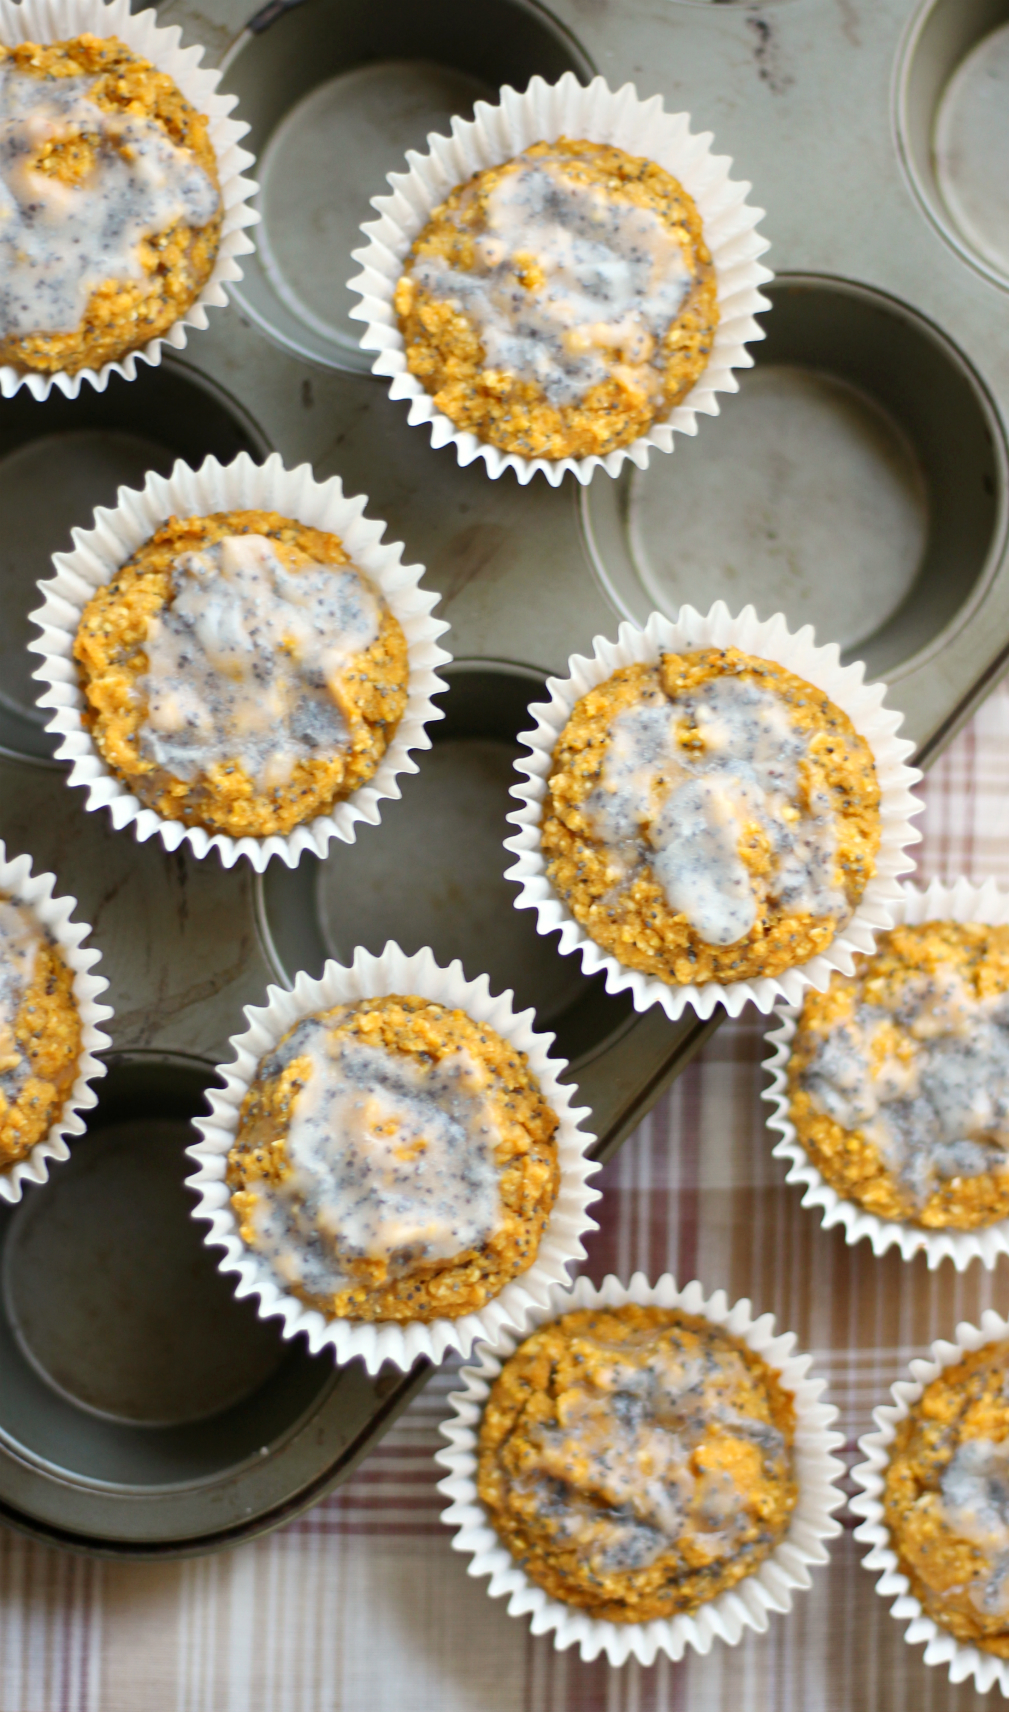 Lively Lemon Poppy Seed Muffins | Strength and Sunshine @RebeccaGF666 It's always springtime with these vibrant, healthy, lively lemon poppy seed muffins! A fun, veggie-packed, gluten-free, vegan breakfast or snack recipe that will leave you feeling happy and bright!